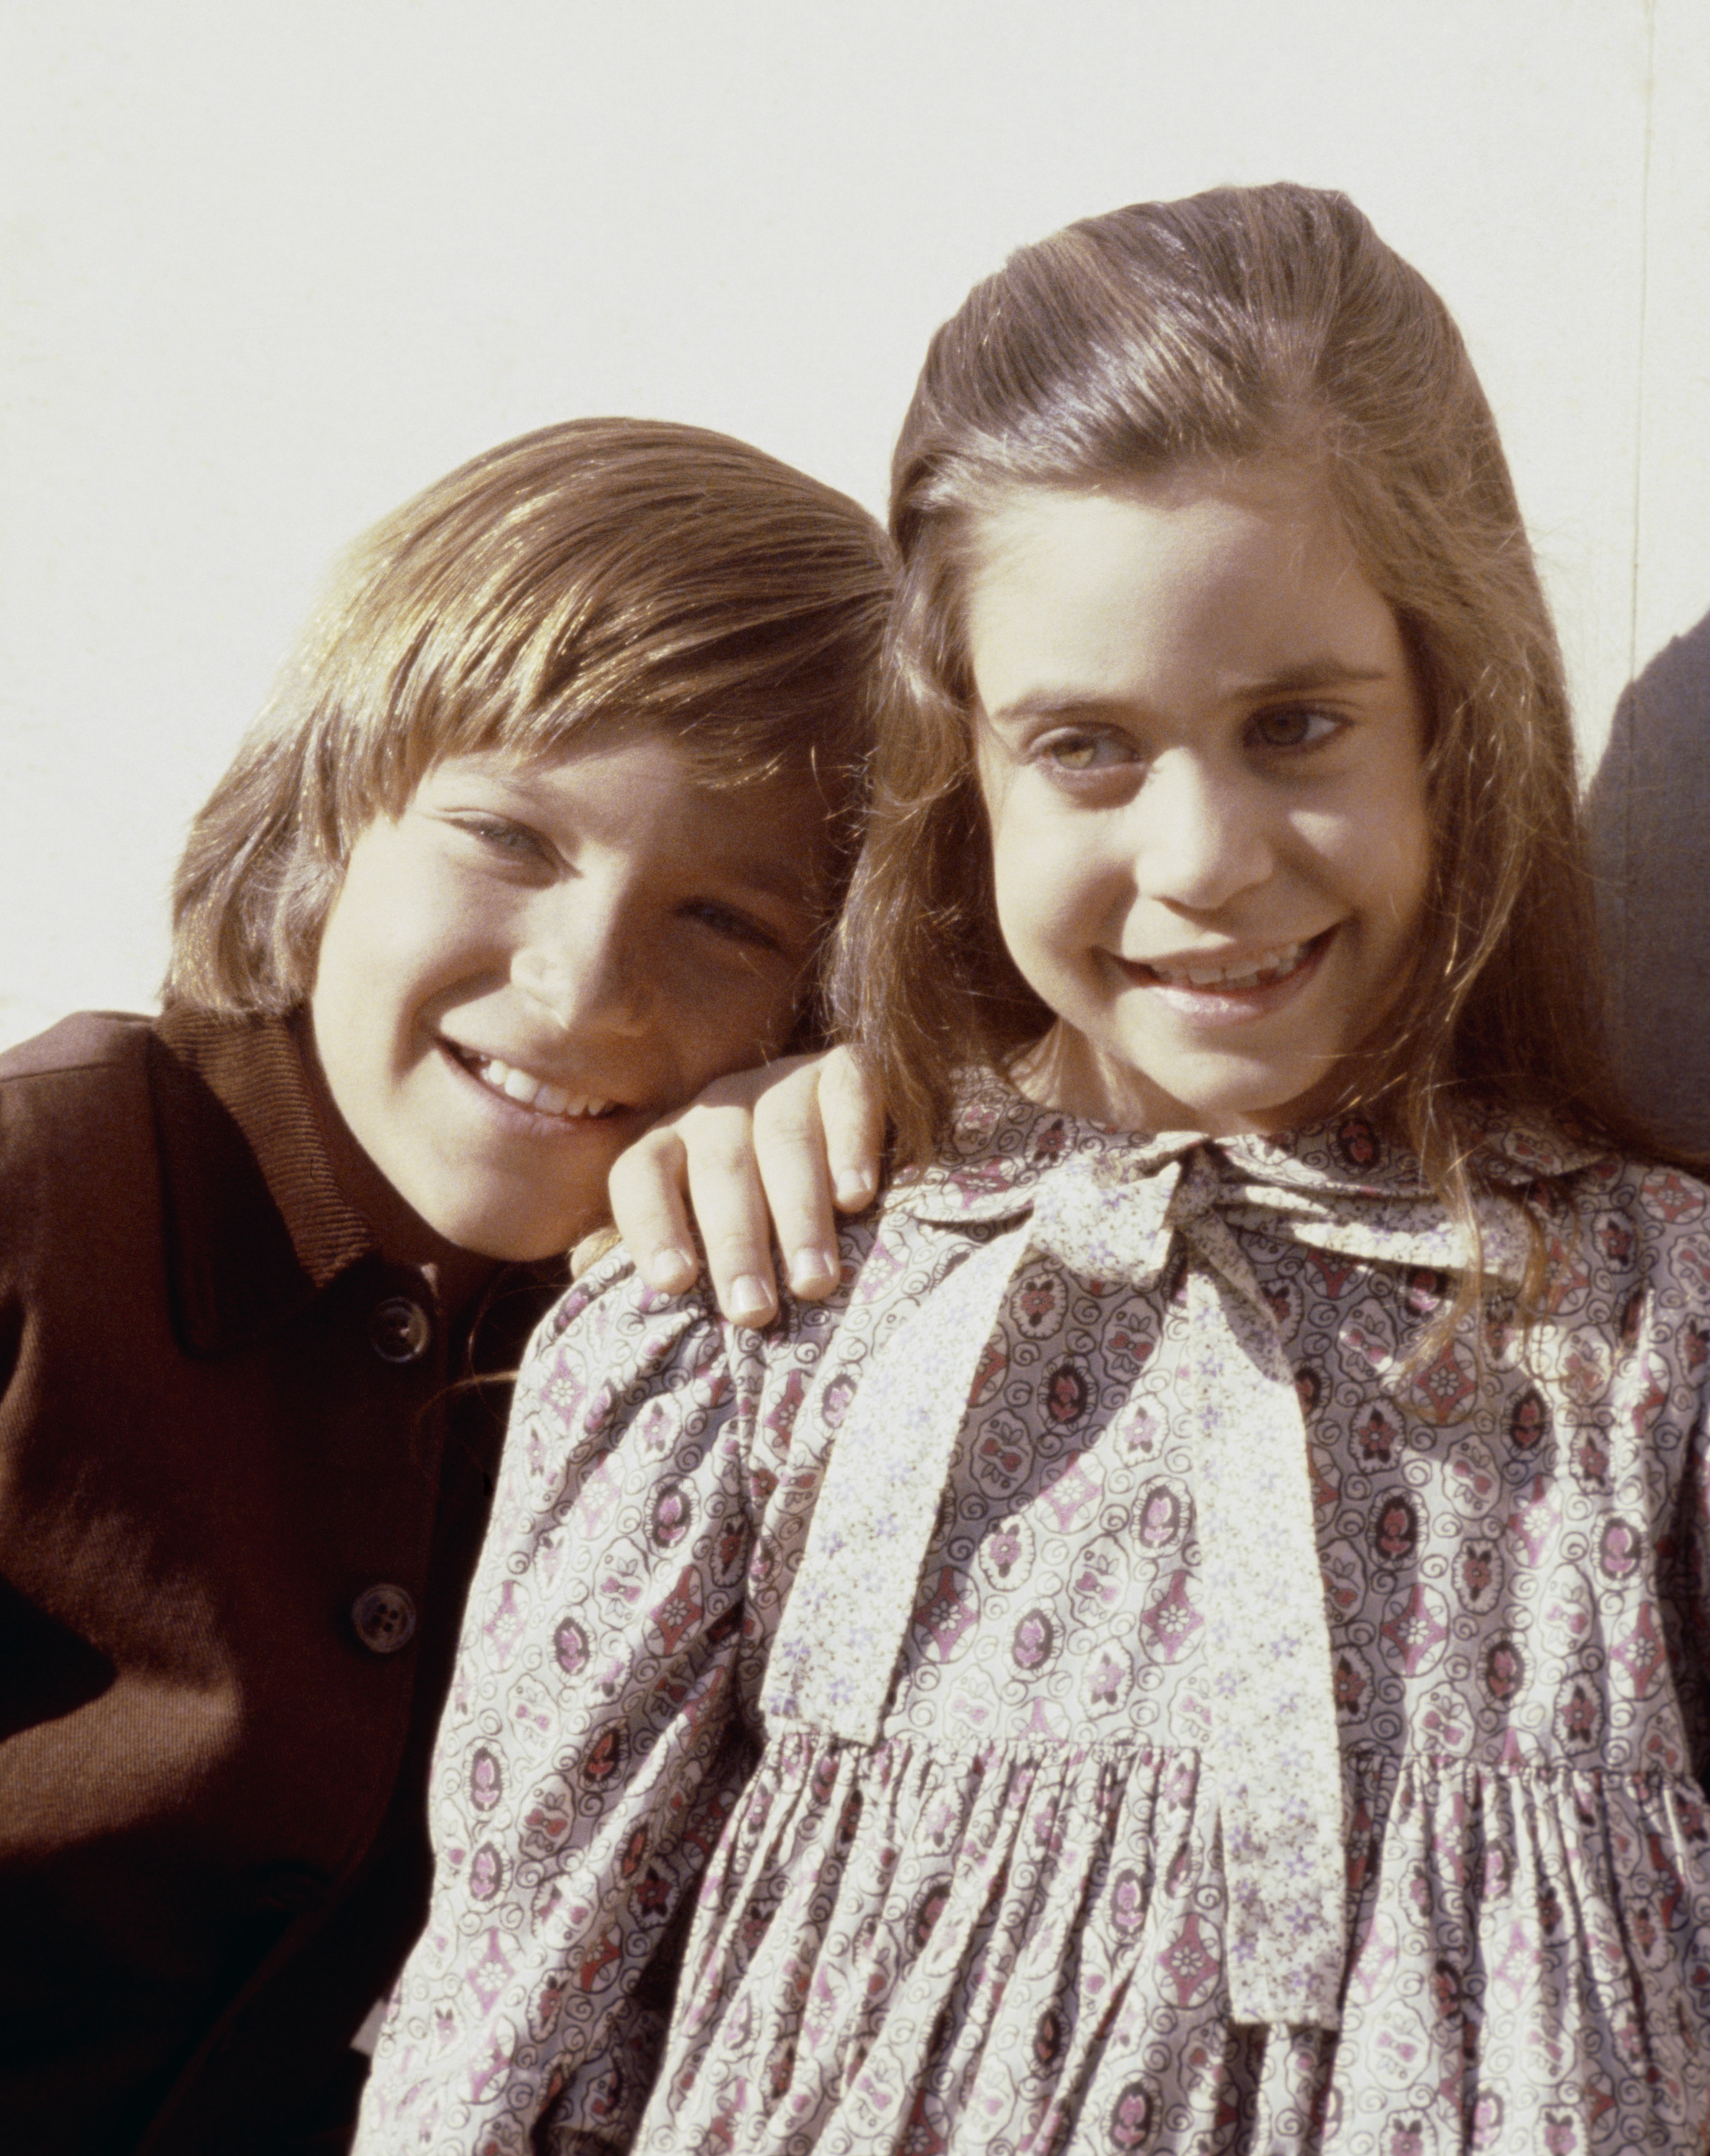 Jason Bateman and Melissa Francis from 'Little House on the Prairie' smiling outside.